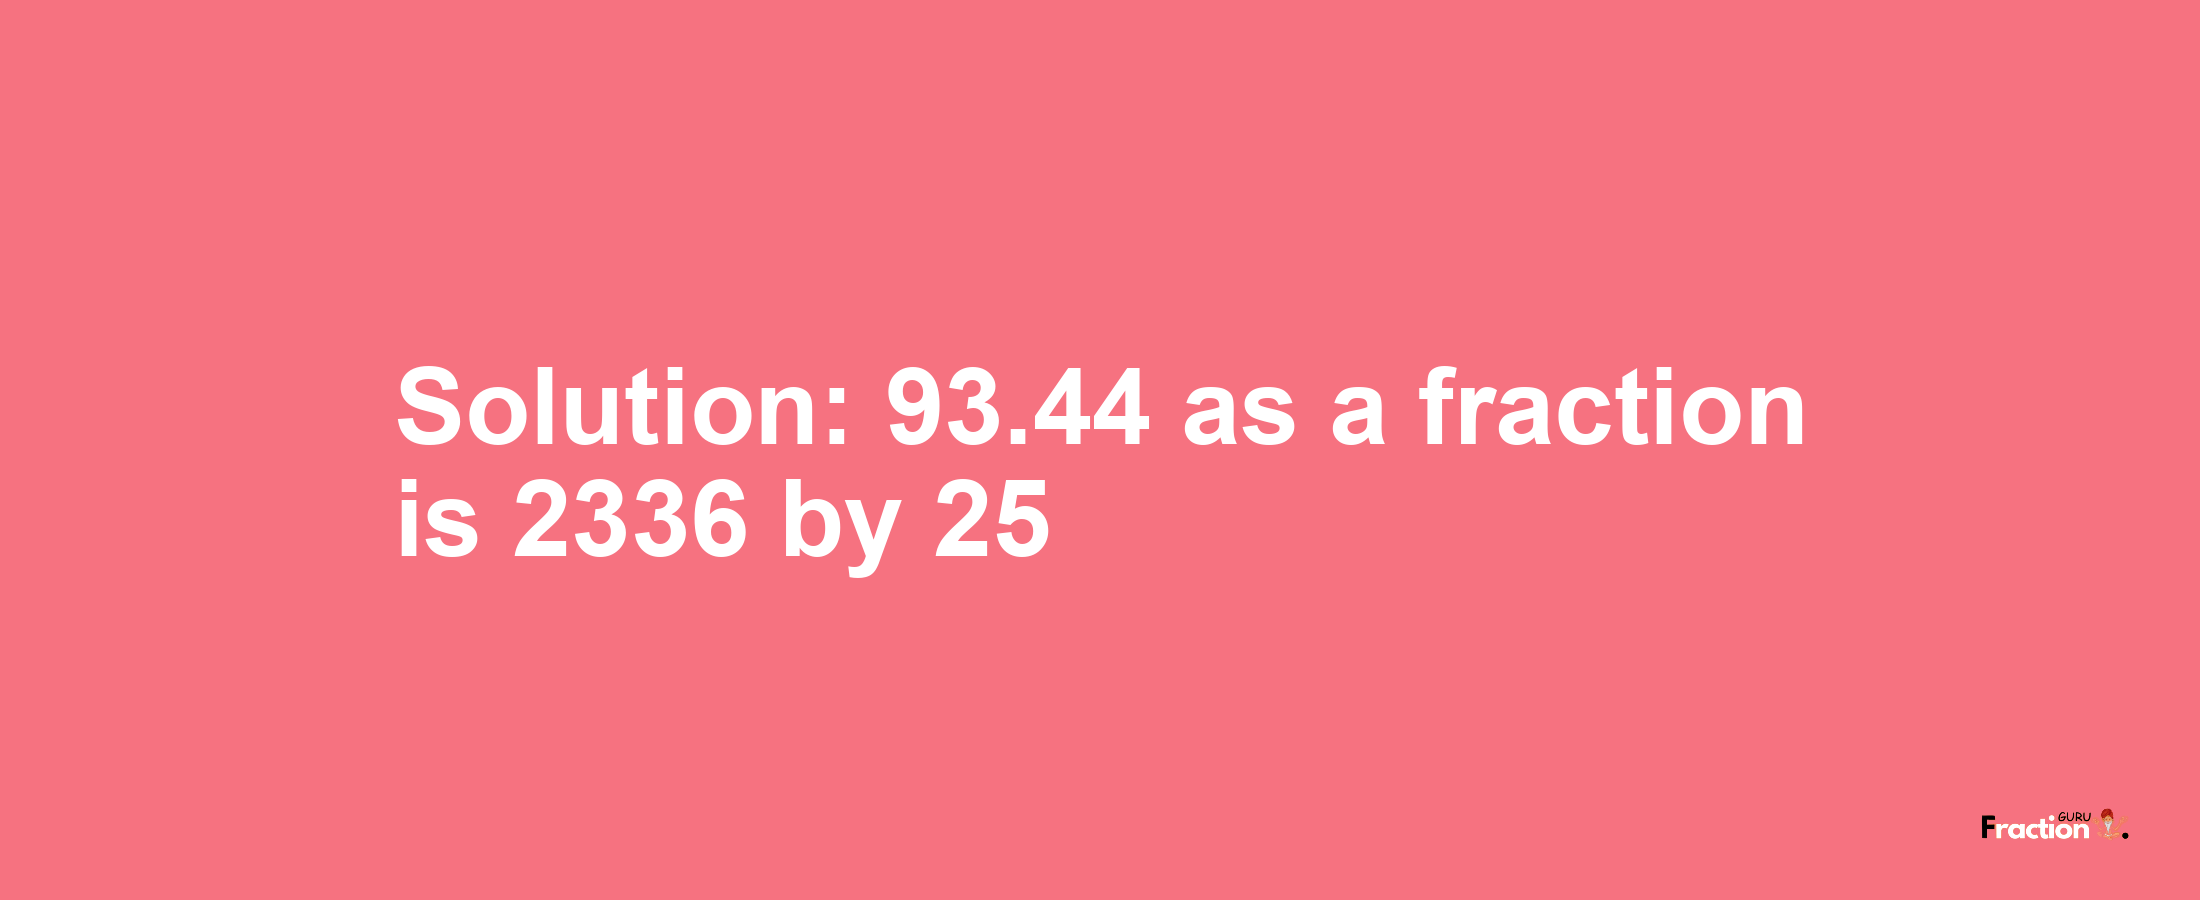 Solution:93.44 as a fraction is 2336/25